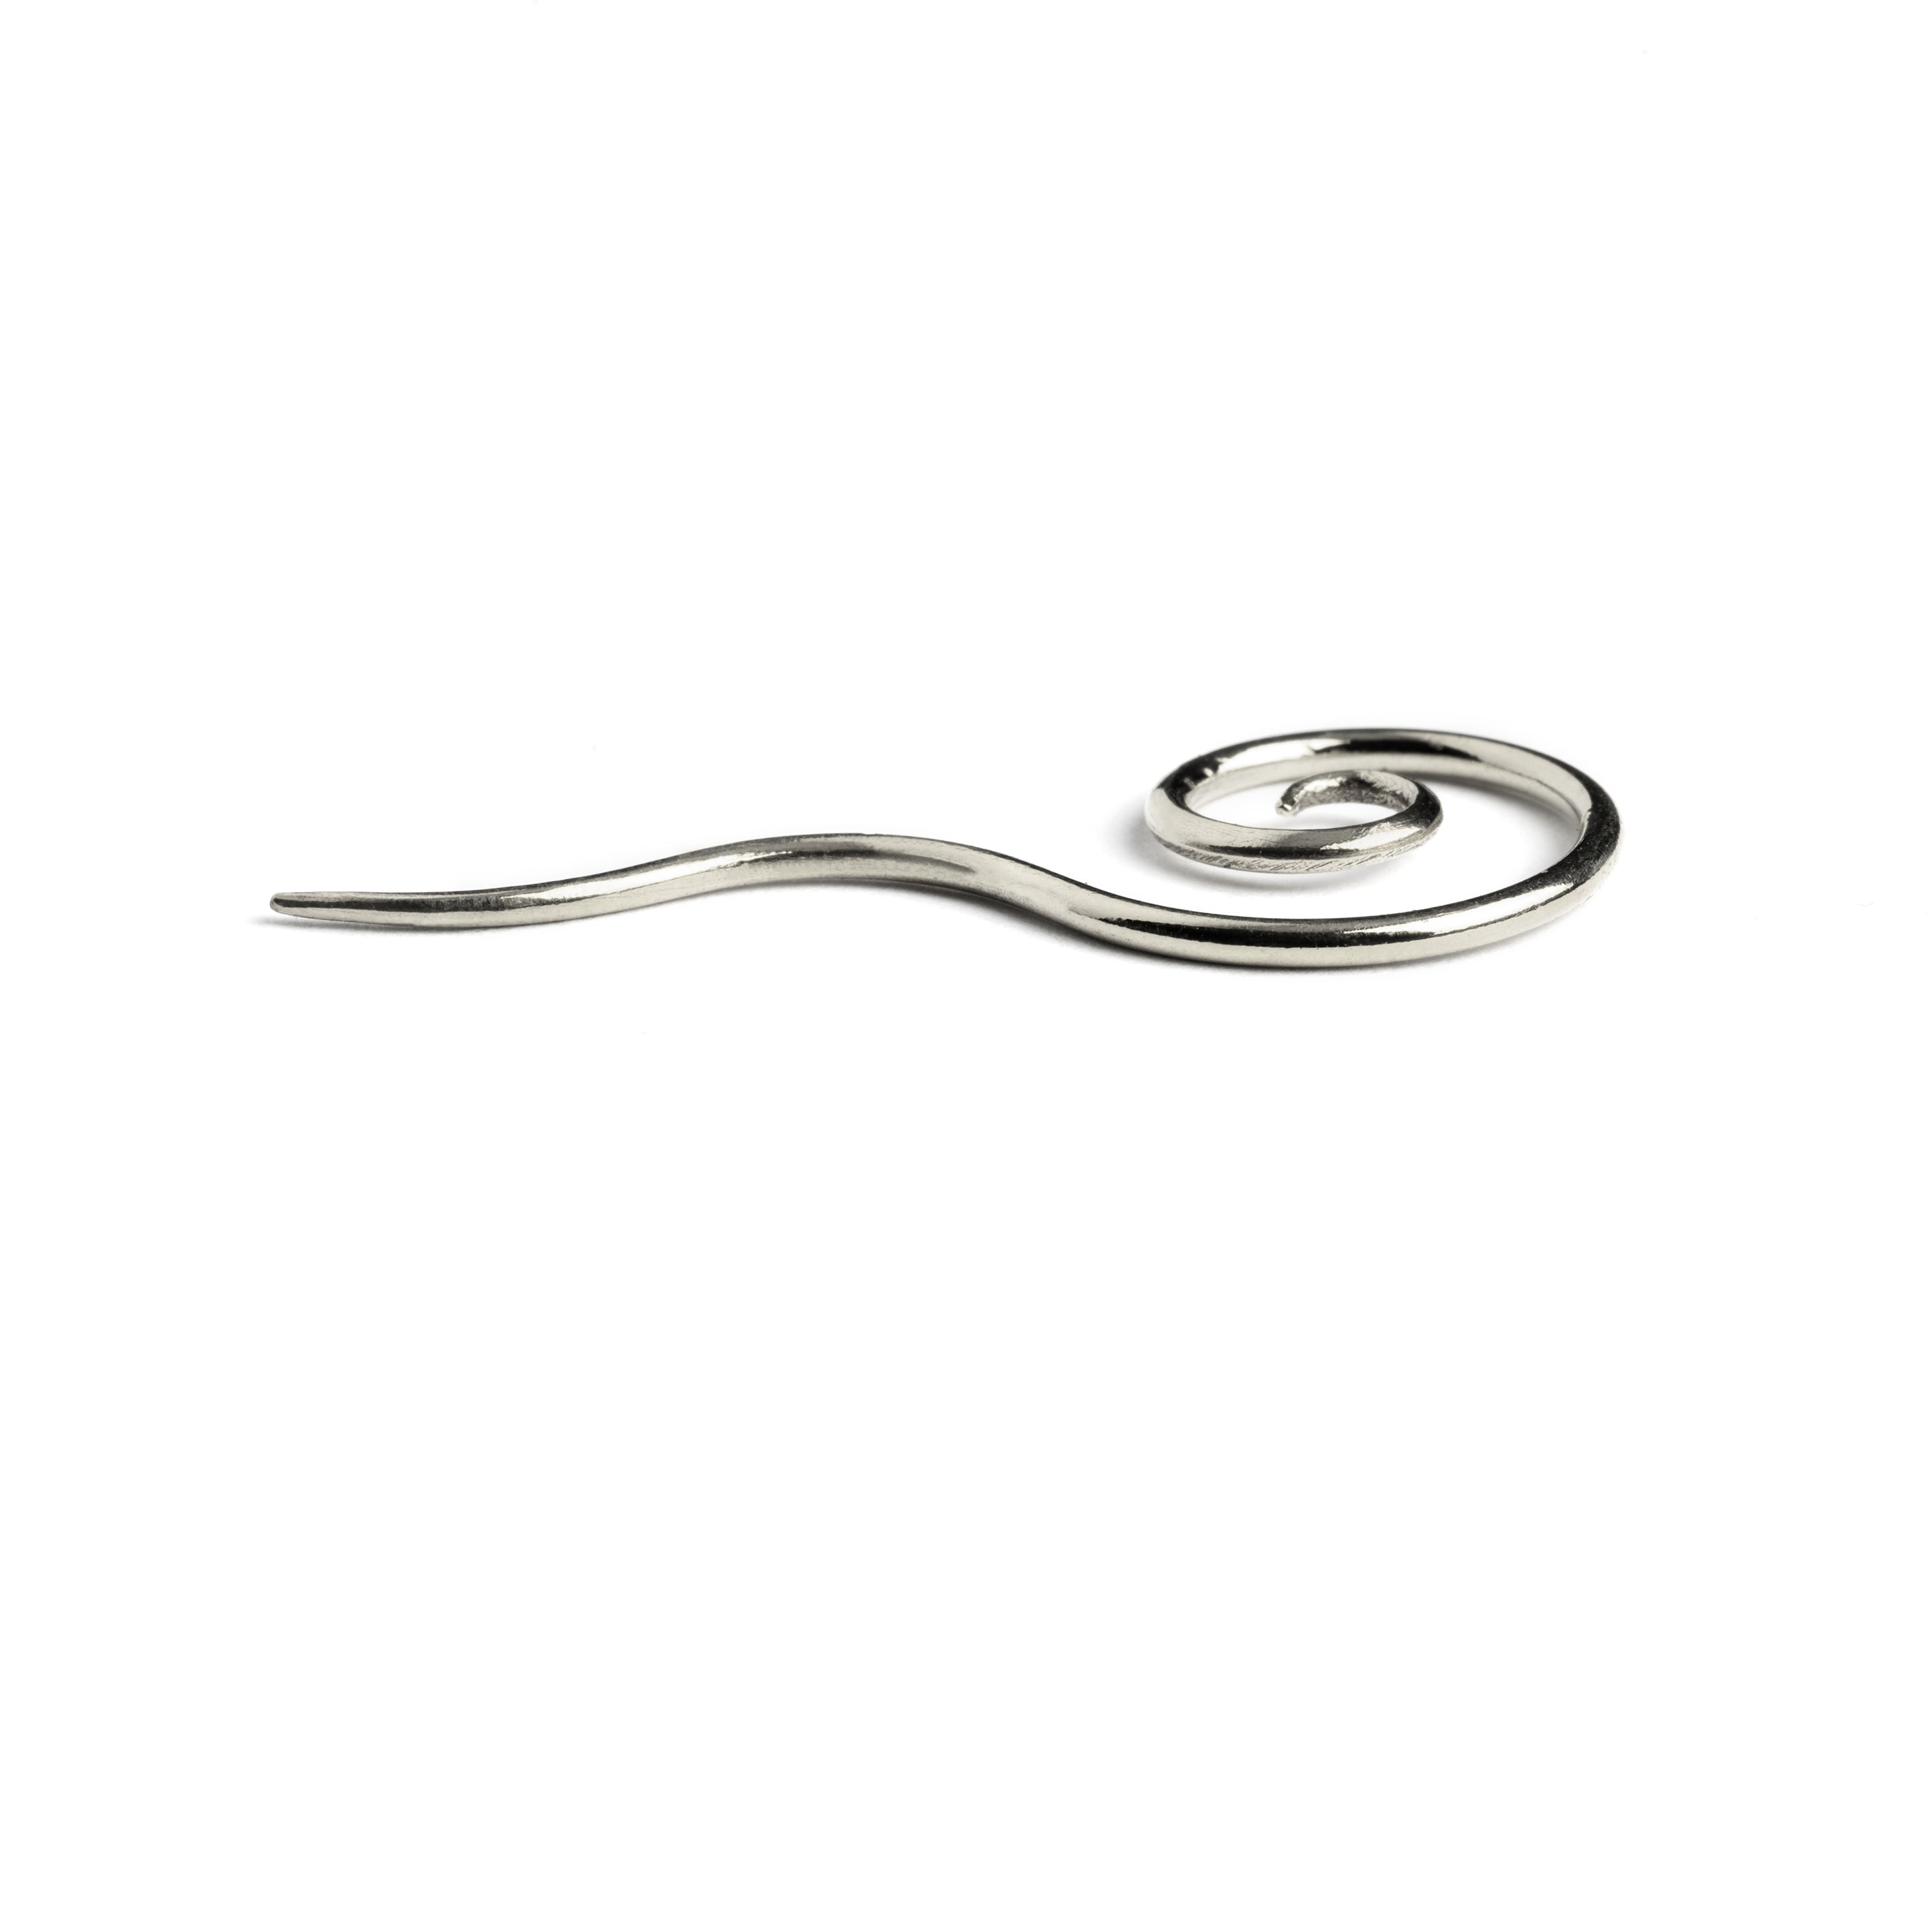 single silver wire long tailed spiral hook earring back view